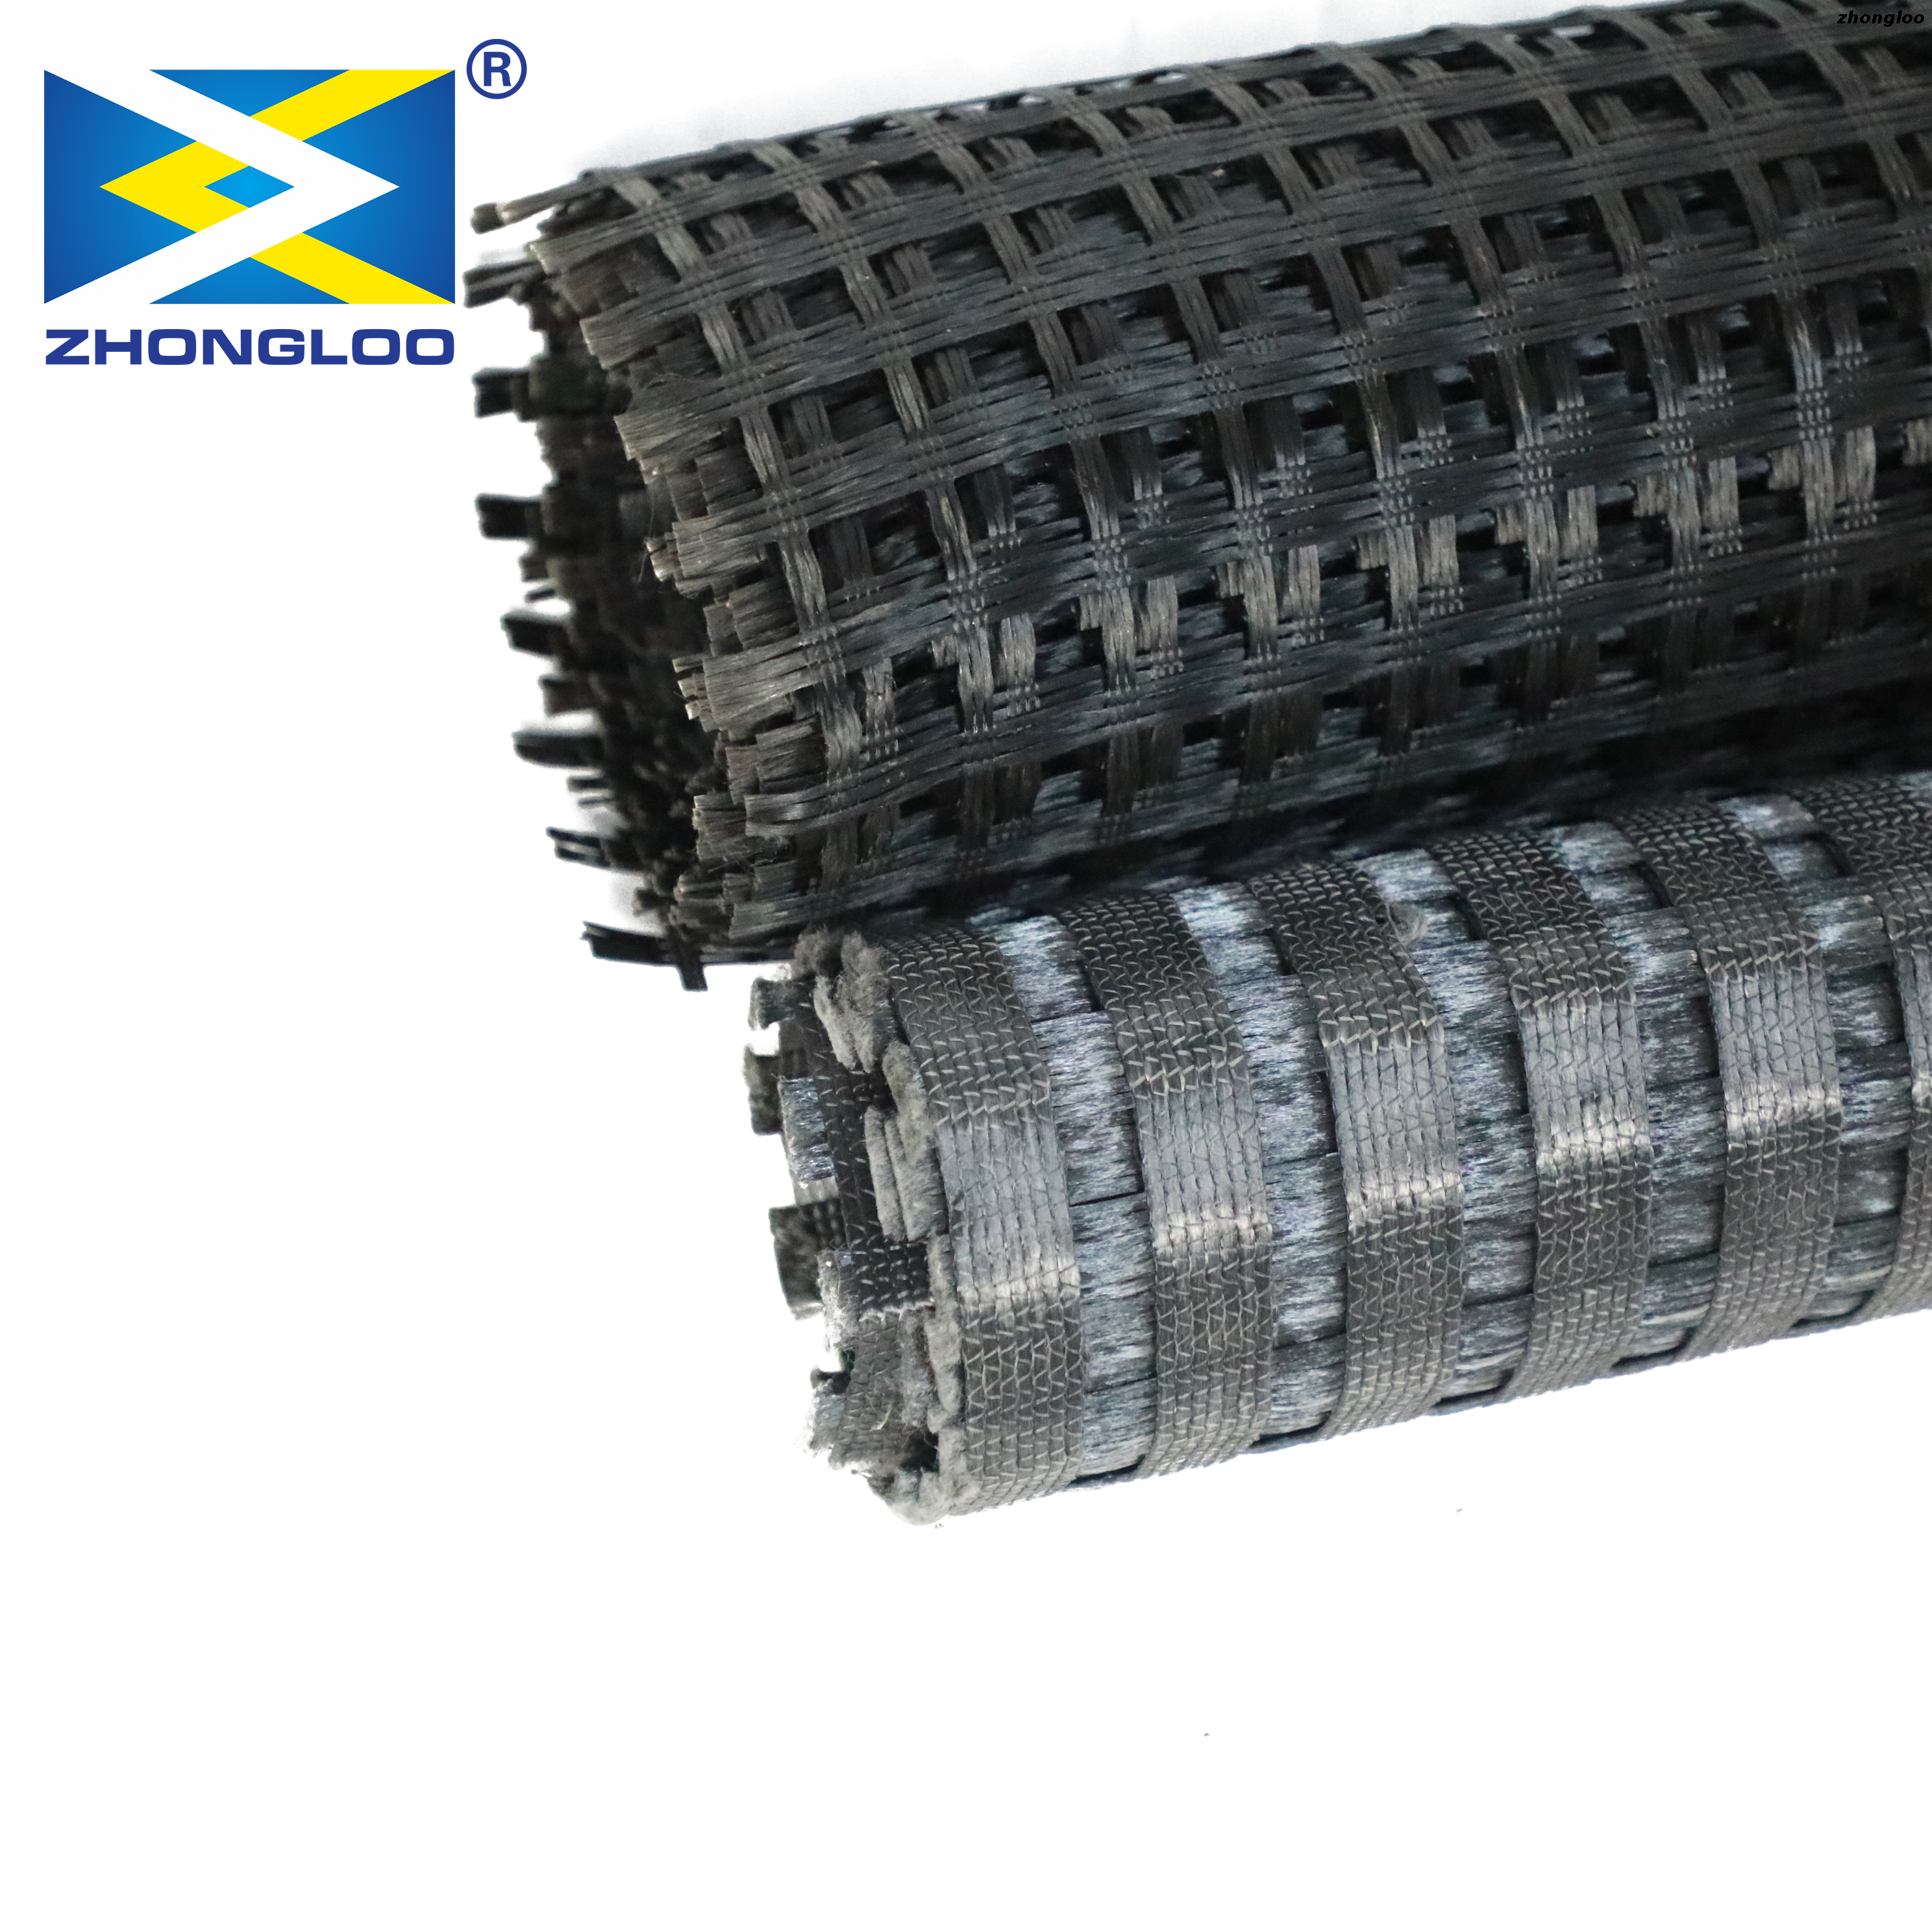 Fiberglass Geogrid for Slopes and Road